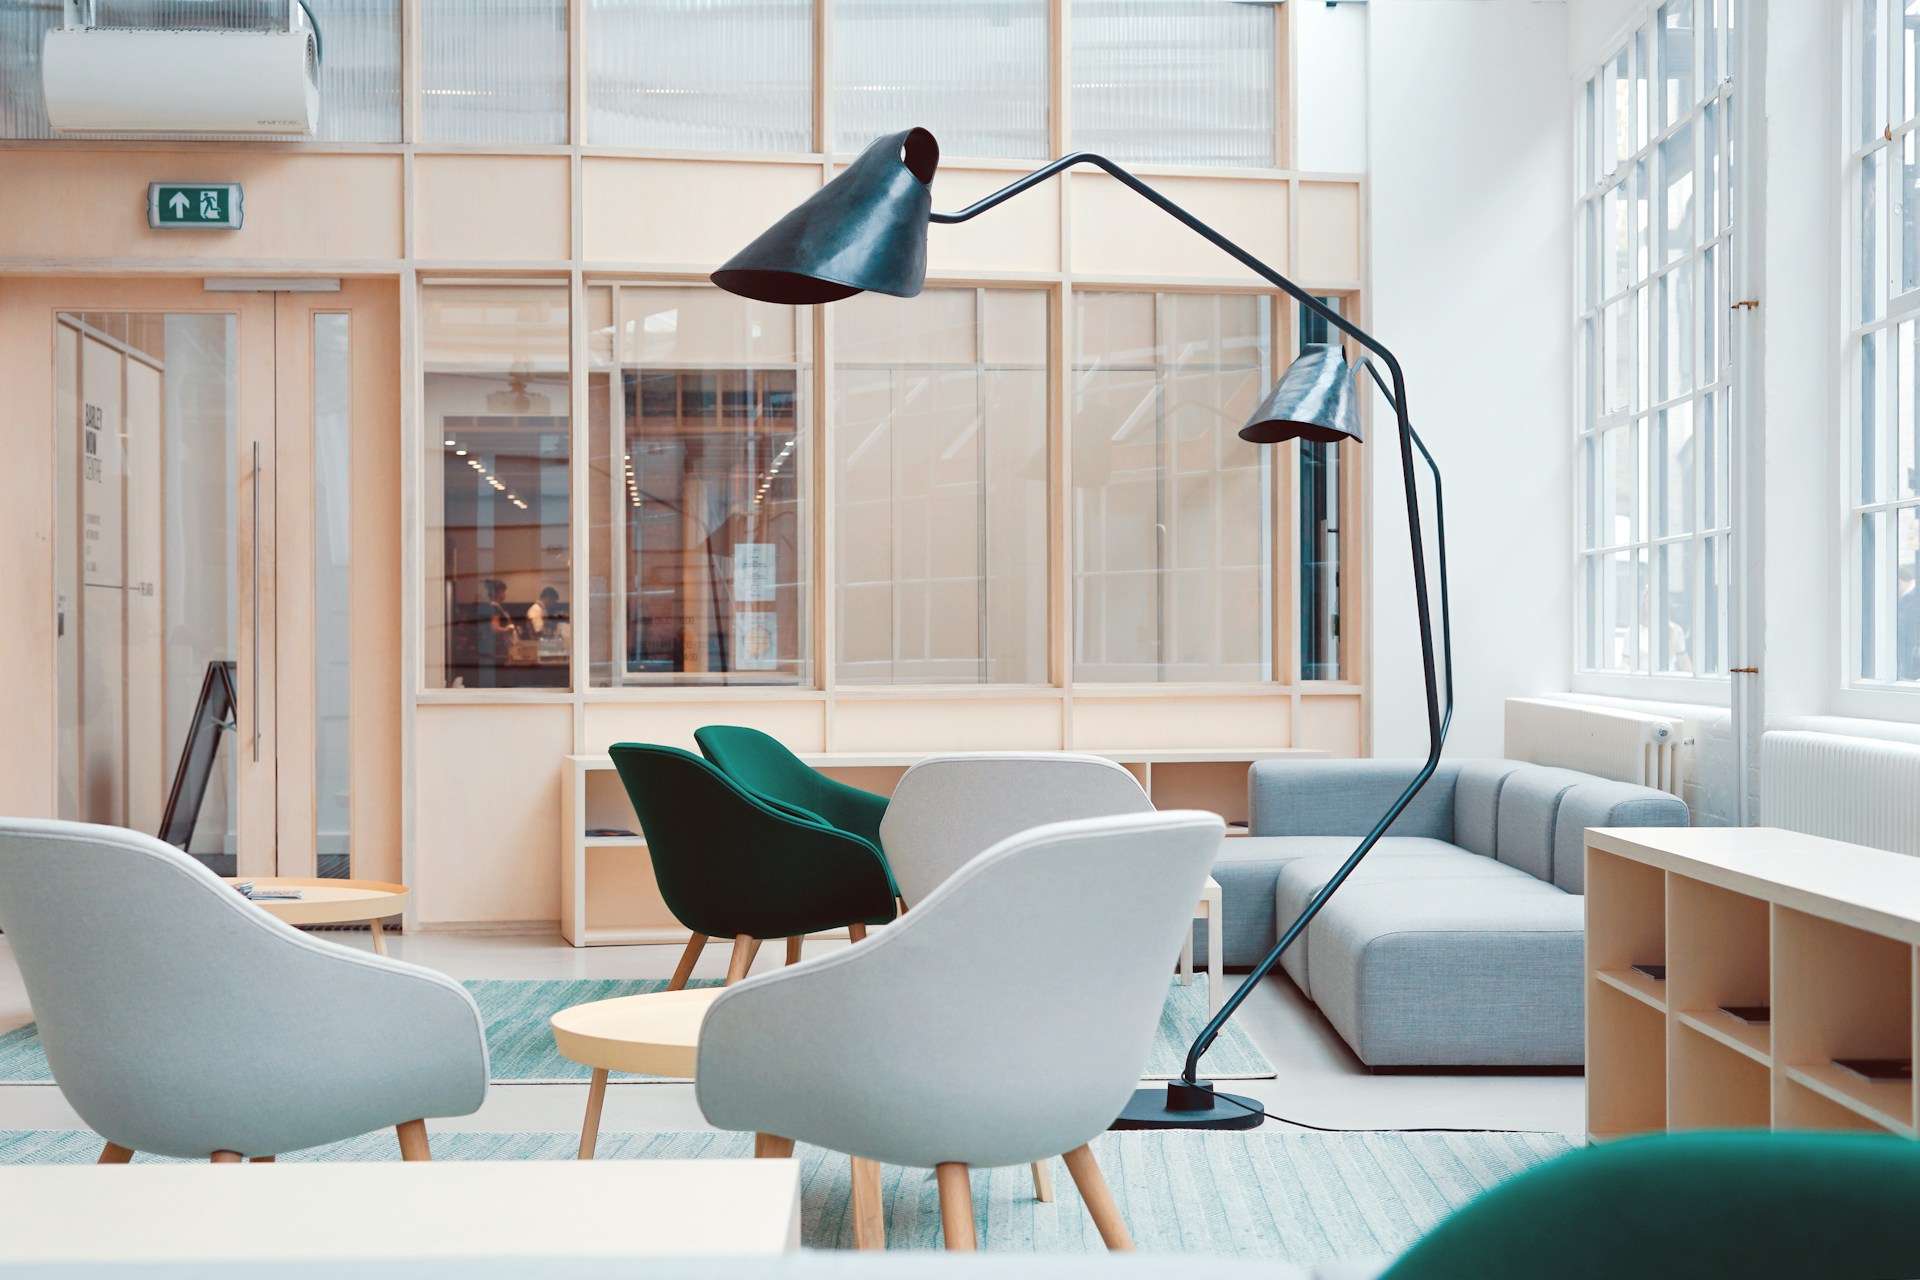 shot-of-a-bright-office-with-metal-lamps-and-grey-and-green-chairs-in-a-seating-area